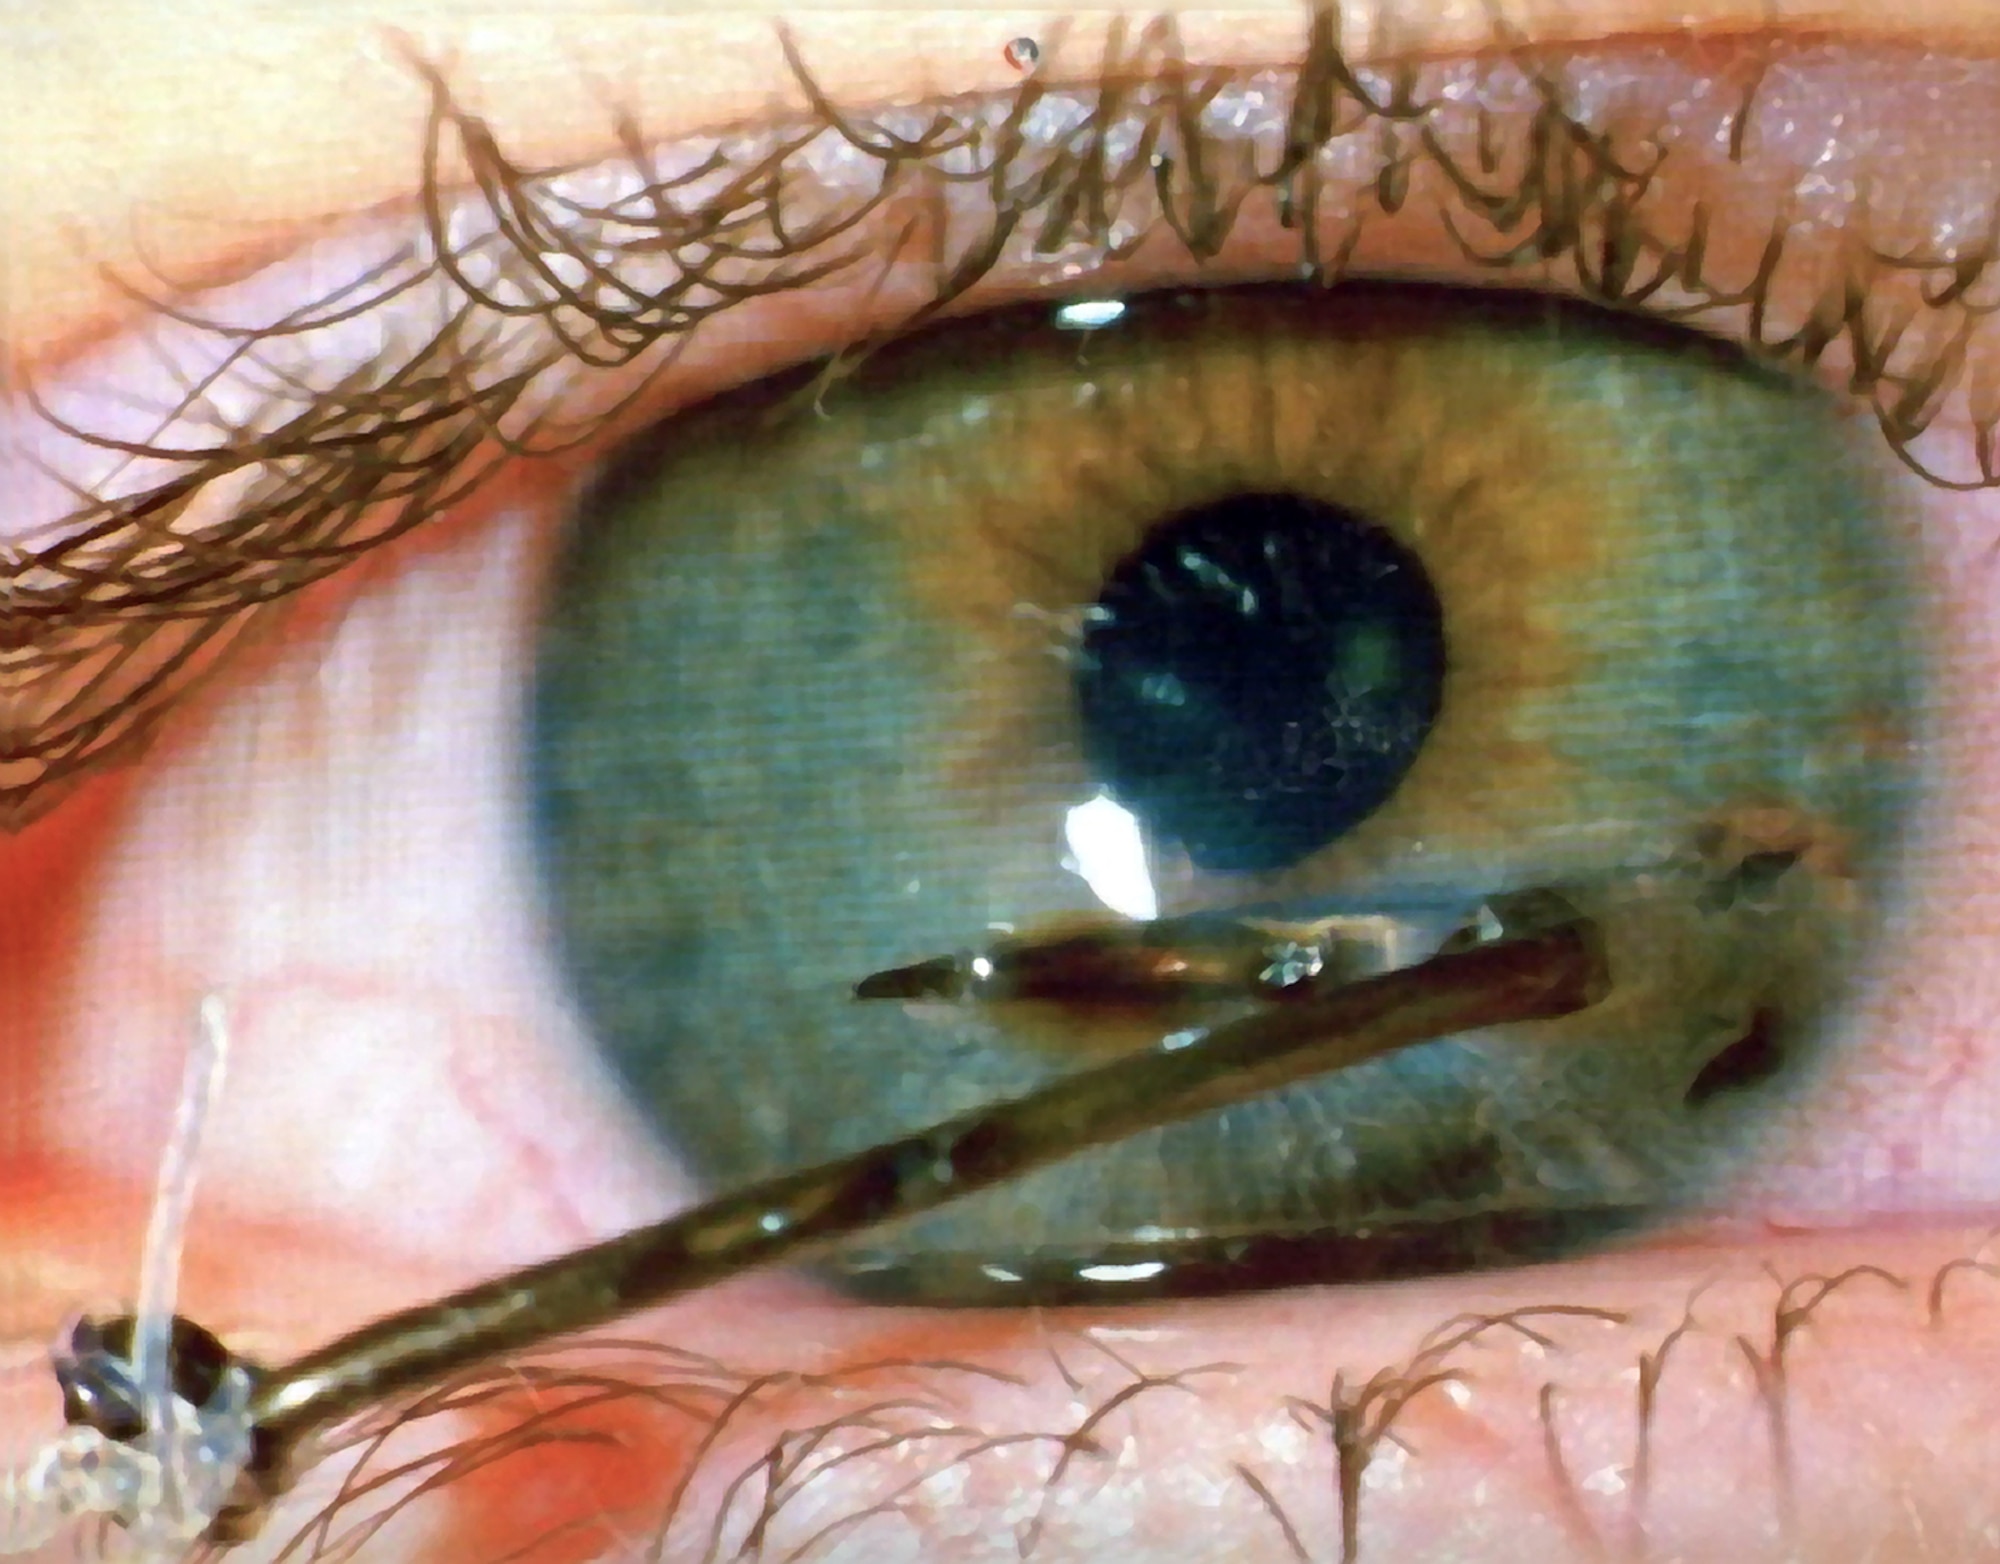 Many fishing hooks have barbs that make them difficult to remove if they embed in an eye. If you or a buddy do catch a hook in the eye, do not try to remove it yourself, as you may cause more damage. Tape the lure to your brow to keep its weight from tugging on your eyeball and get to the nearest hospital immediately. (Courtesy photo)